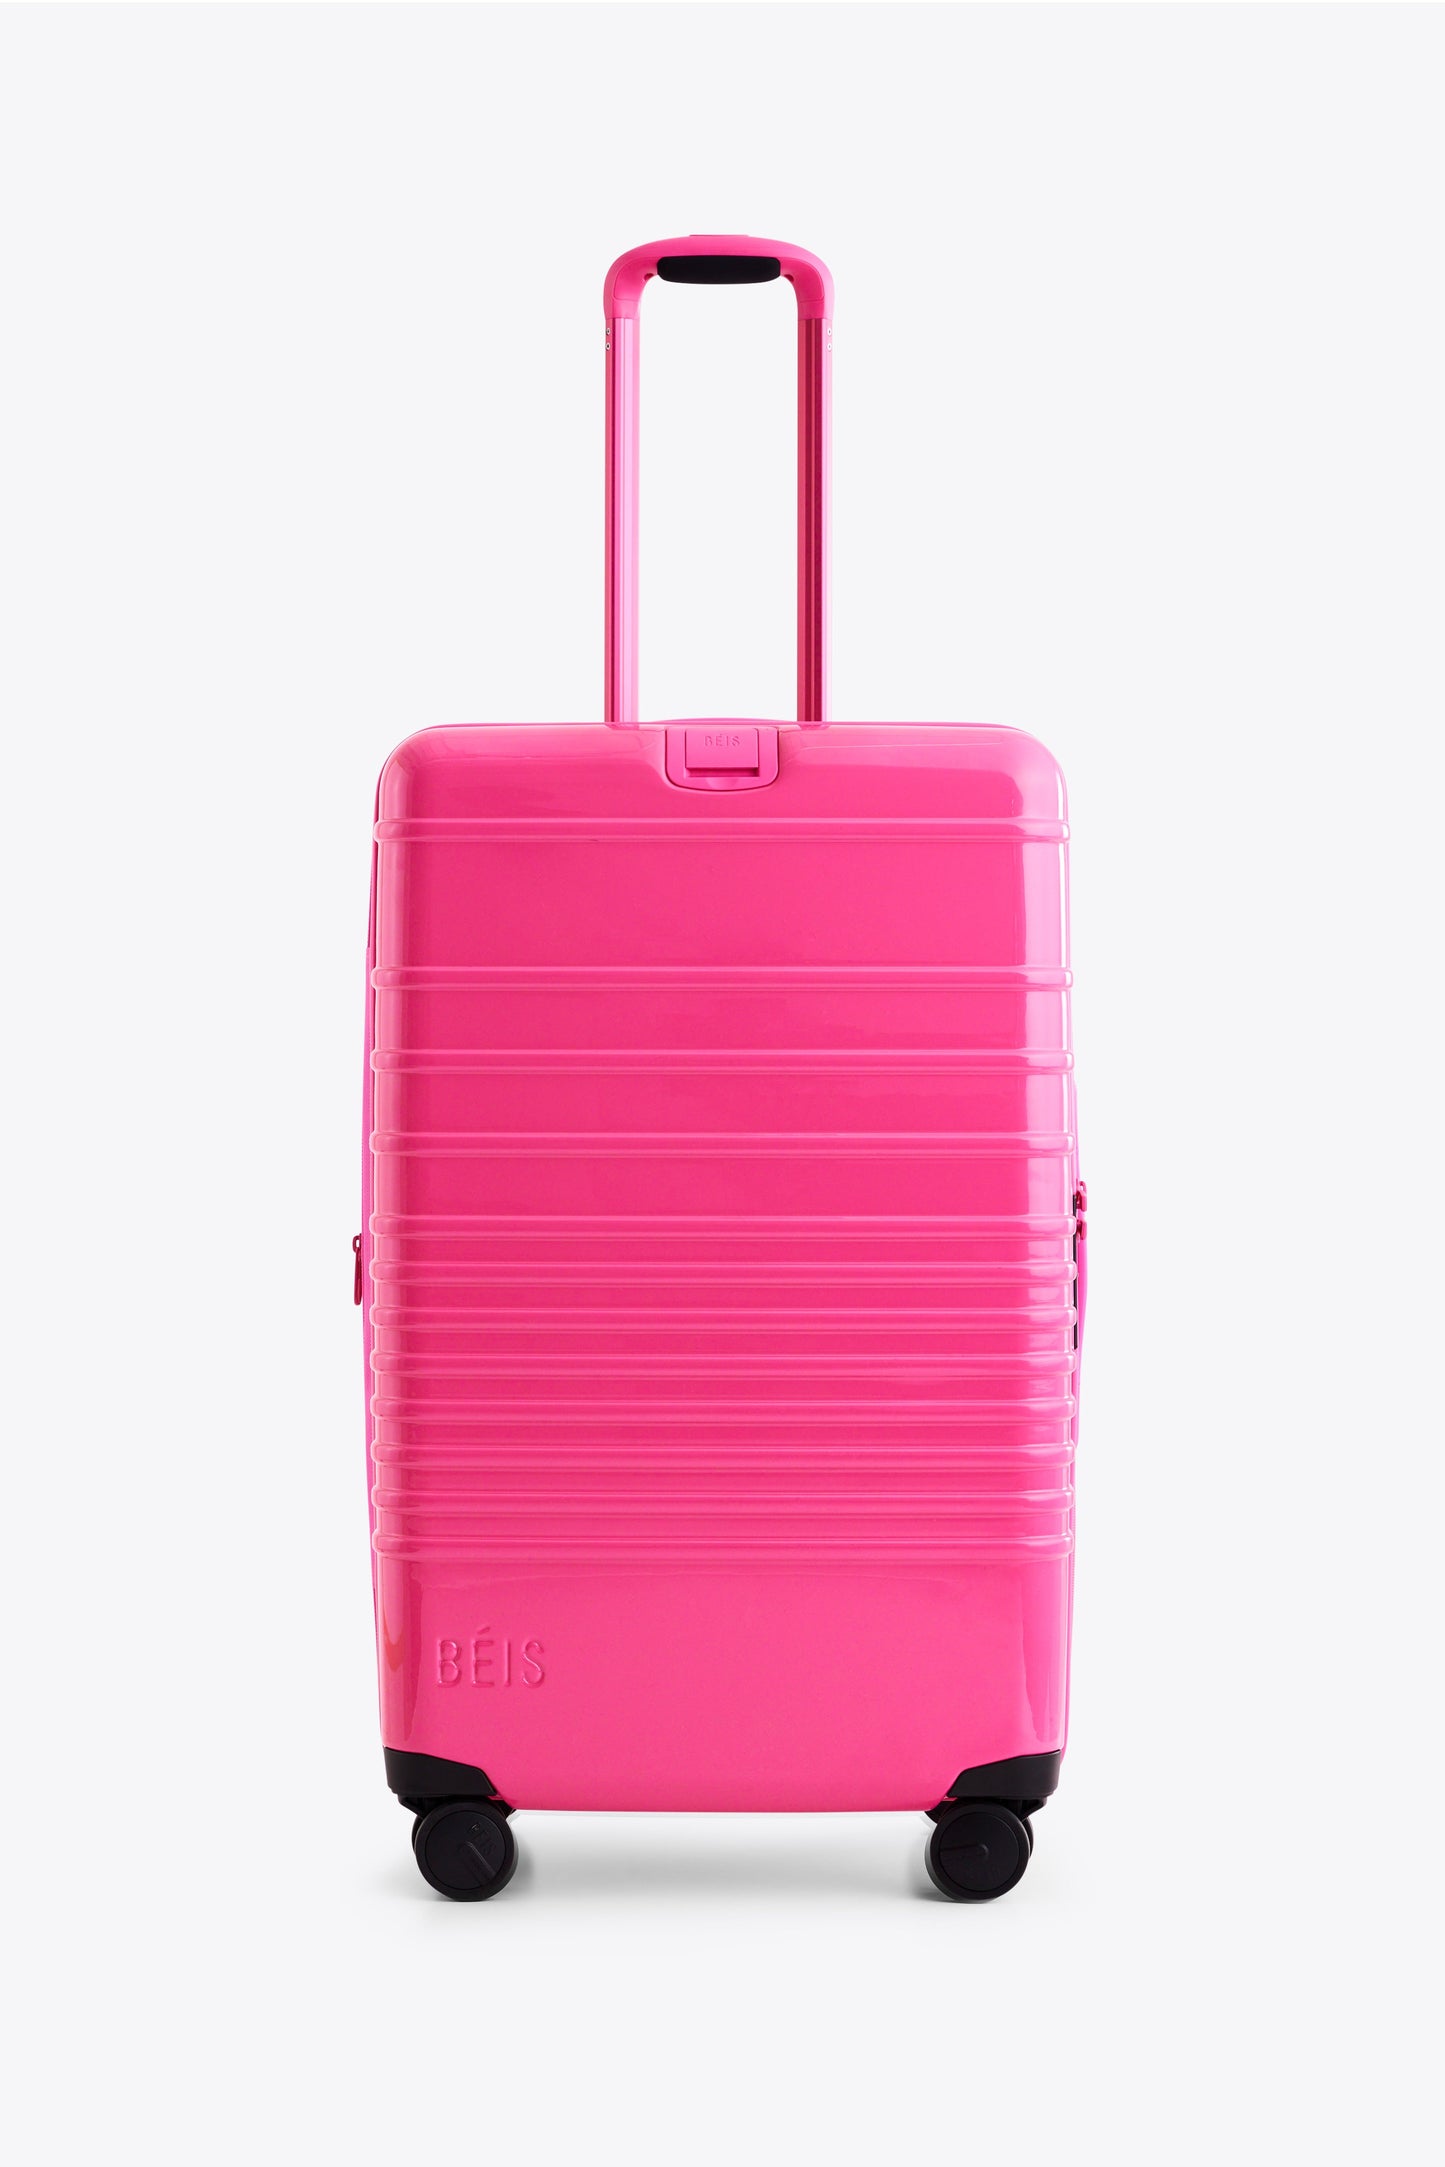 The Medium Check-in Roller in Barbie™ Pink